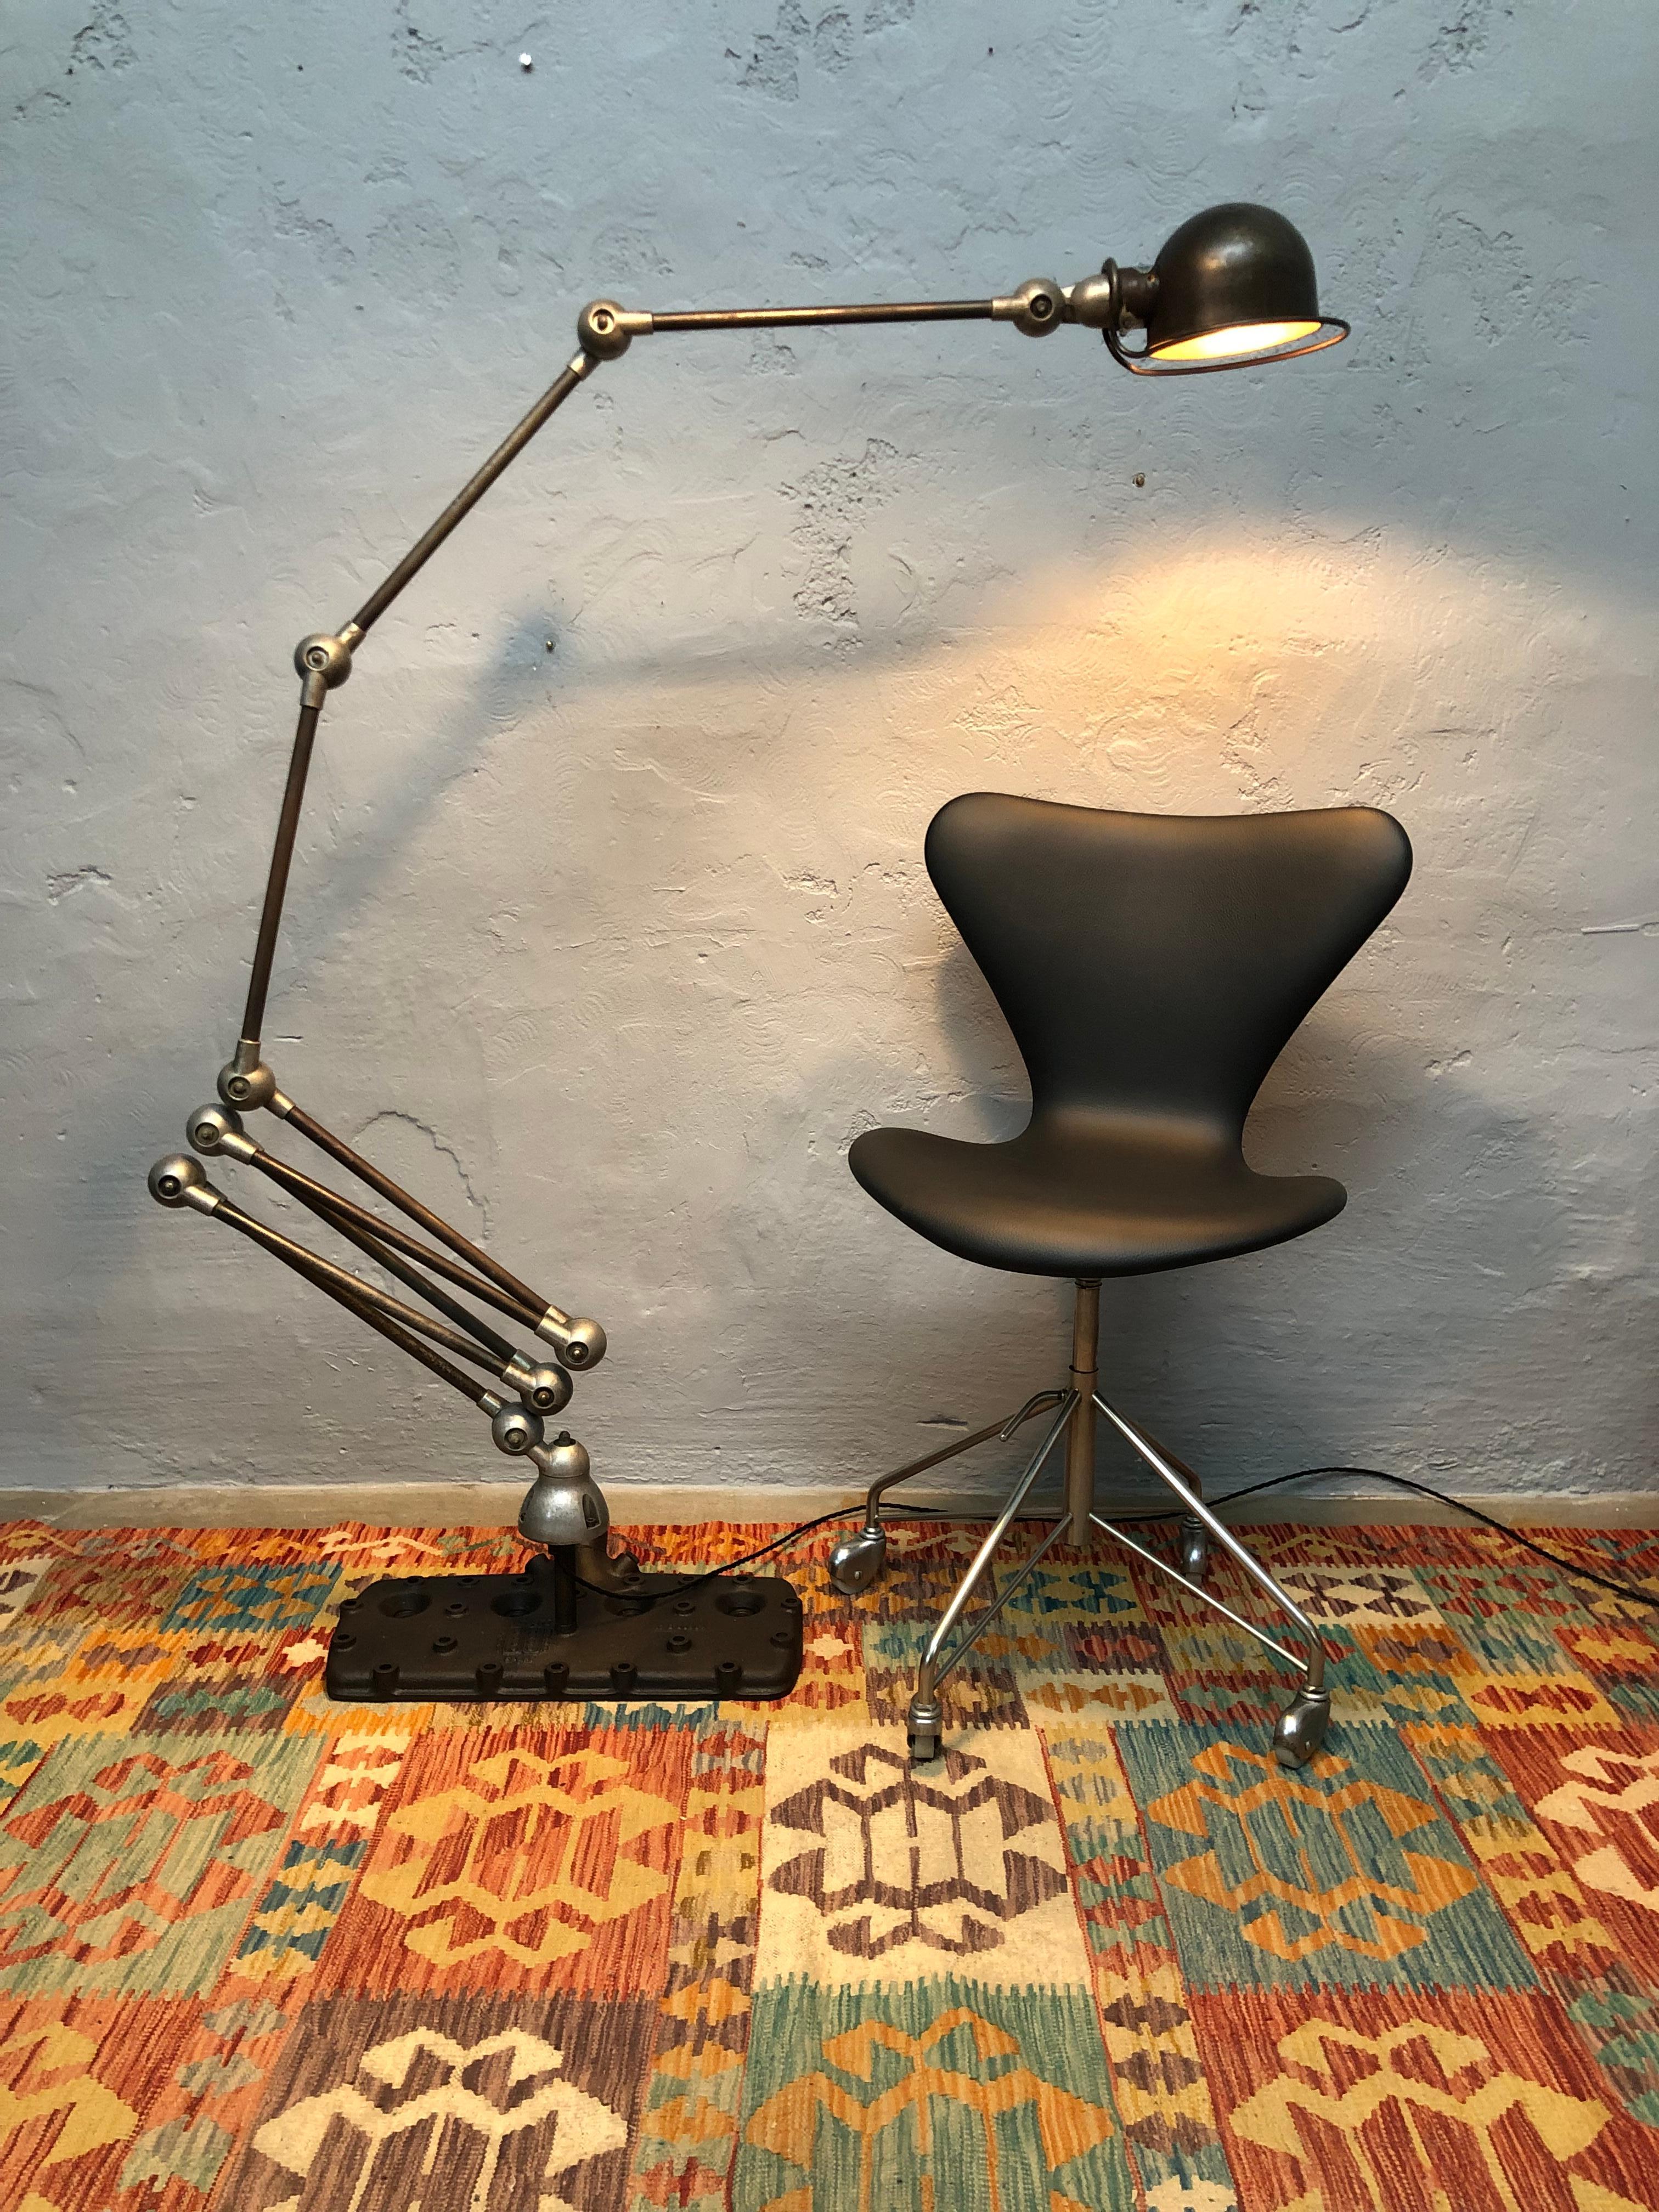 A vintage 3117 series one hammer office chair by Arne Jacobsen for Fritz Hansen of Denmark from the late 1950s. 
This chair has been completely refurbish. 
The wheels have been dismantled and missing ball bearings replaced and greased.